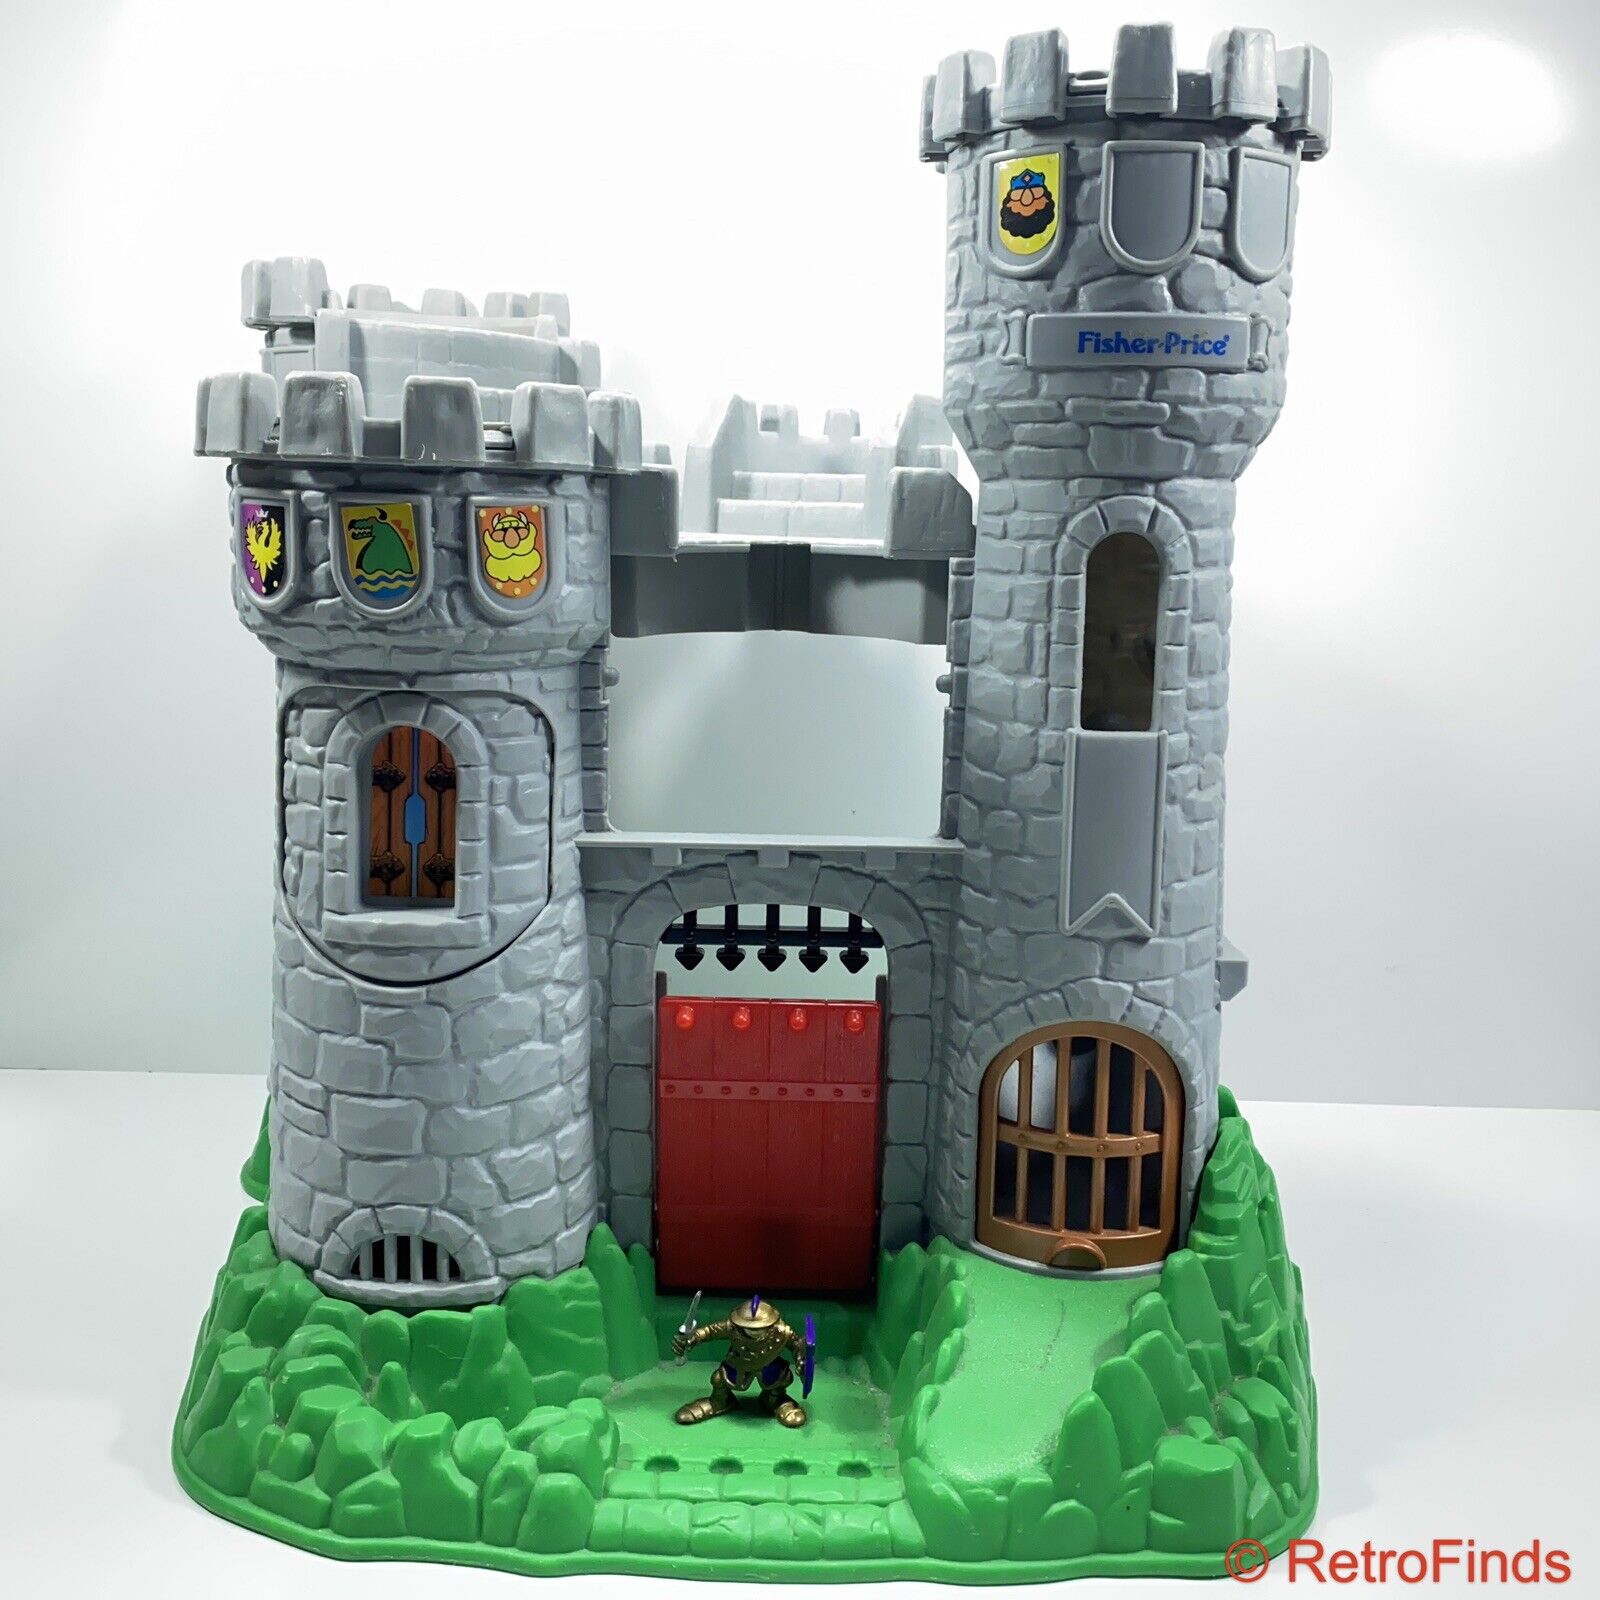 Vintage 1994 Fisher Price Great Adventures Castle w/ Knight Medieval Set 7110 I